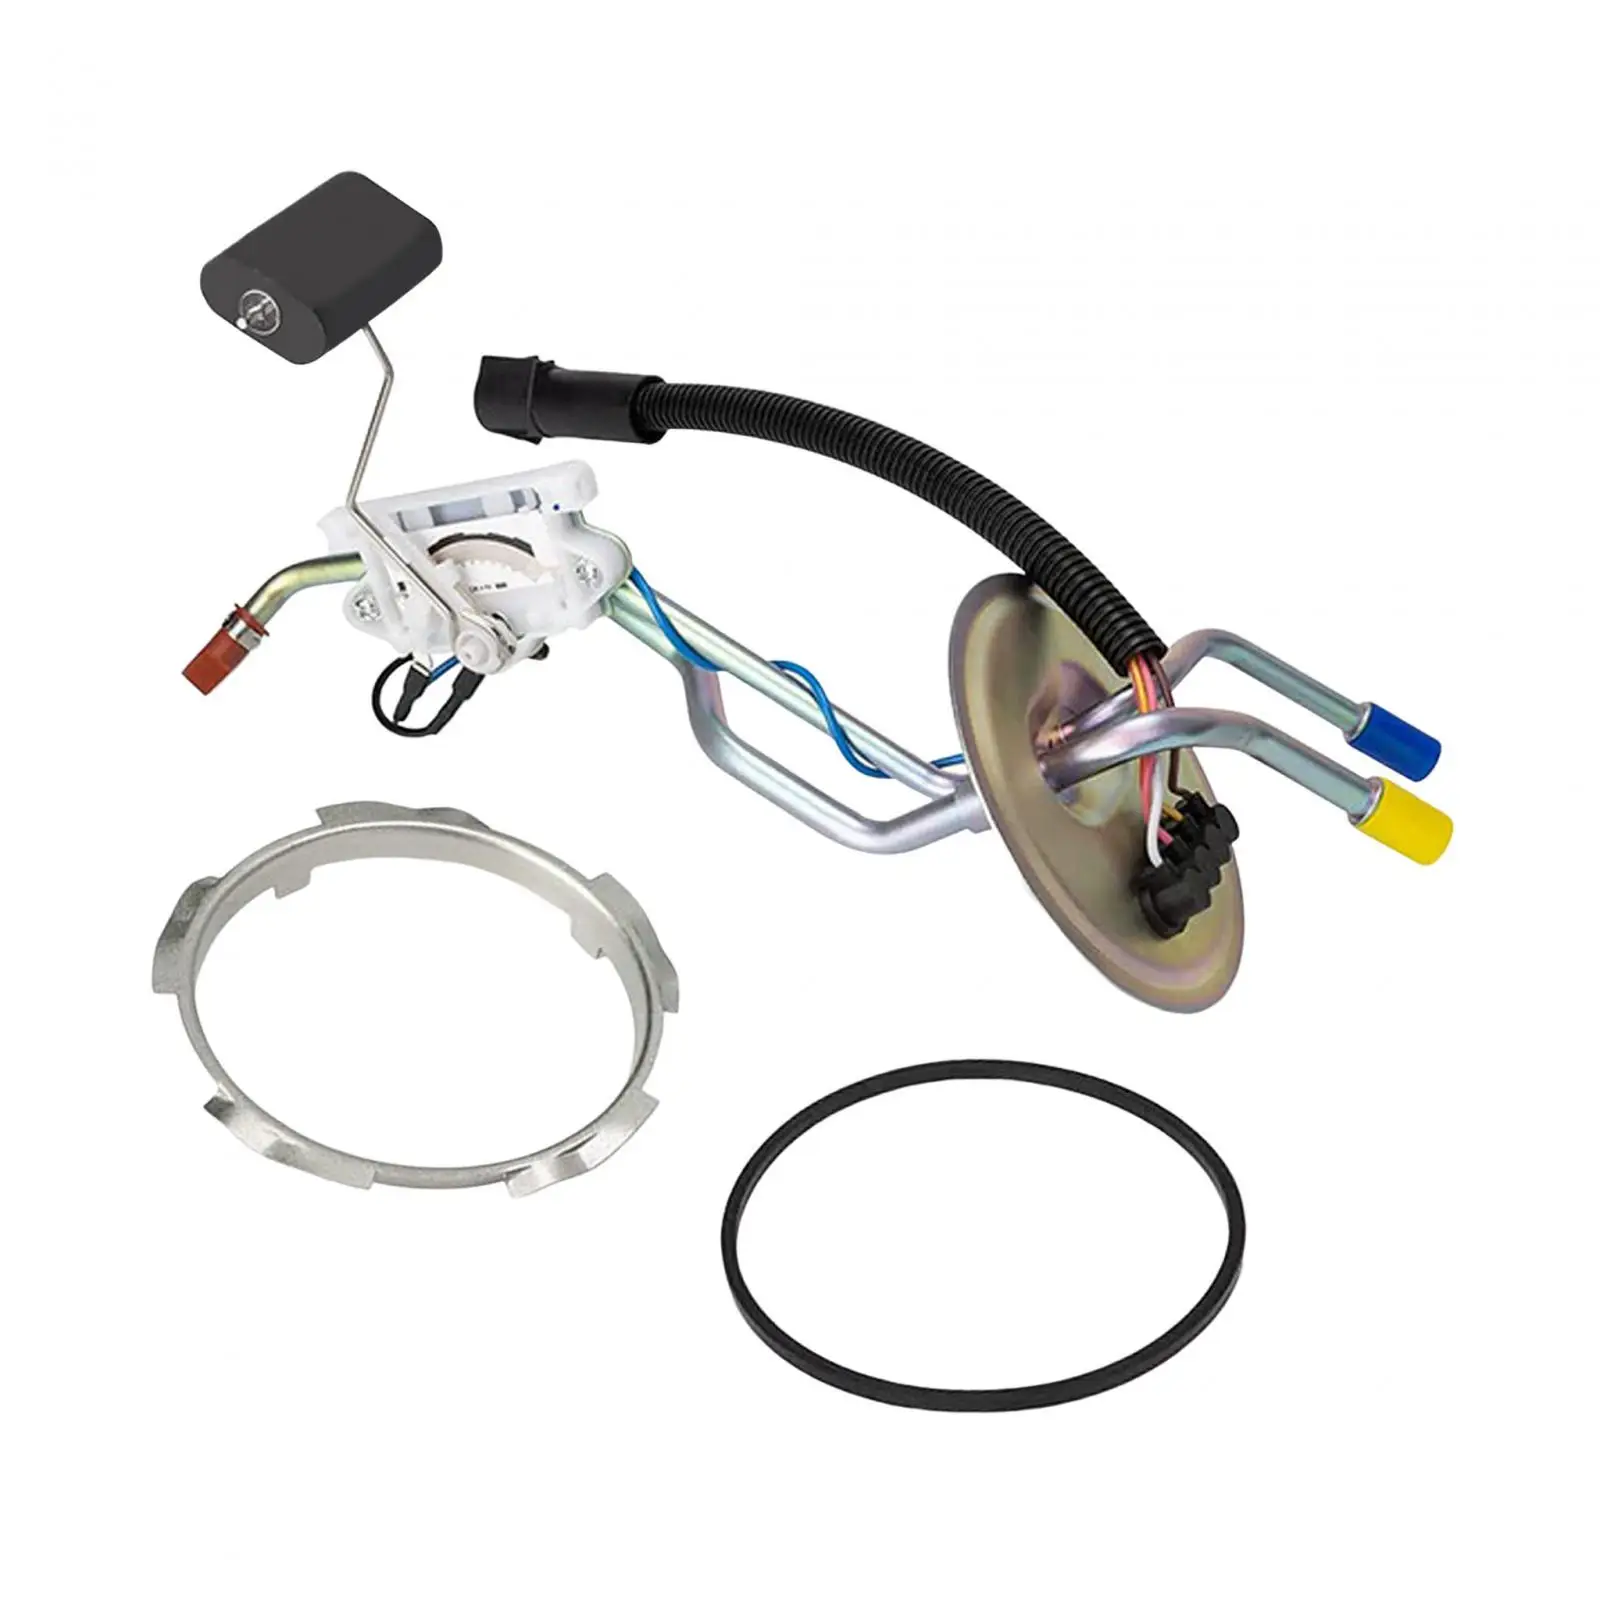 Diesel Fuel Sending Unit Repair Parts for Ford F250 F350 94-97 Auto Accessories Easy Installation Stable Performance